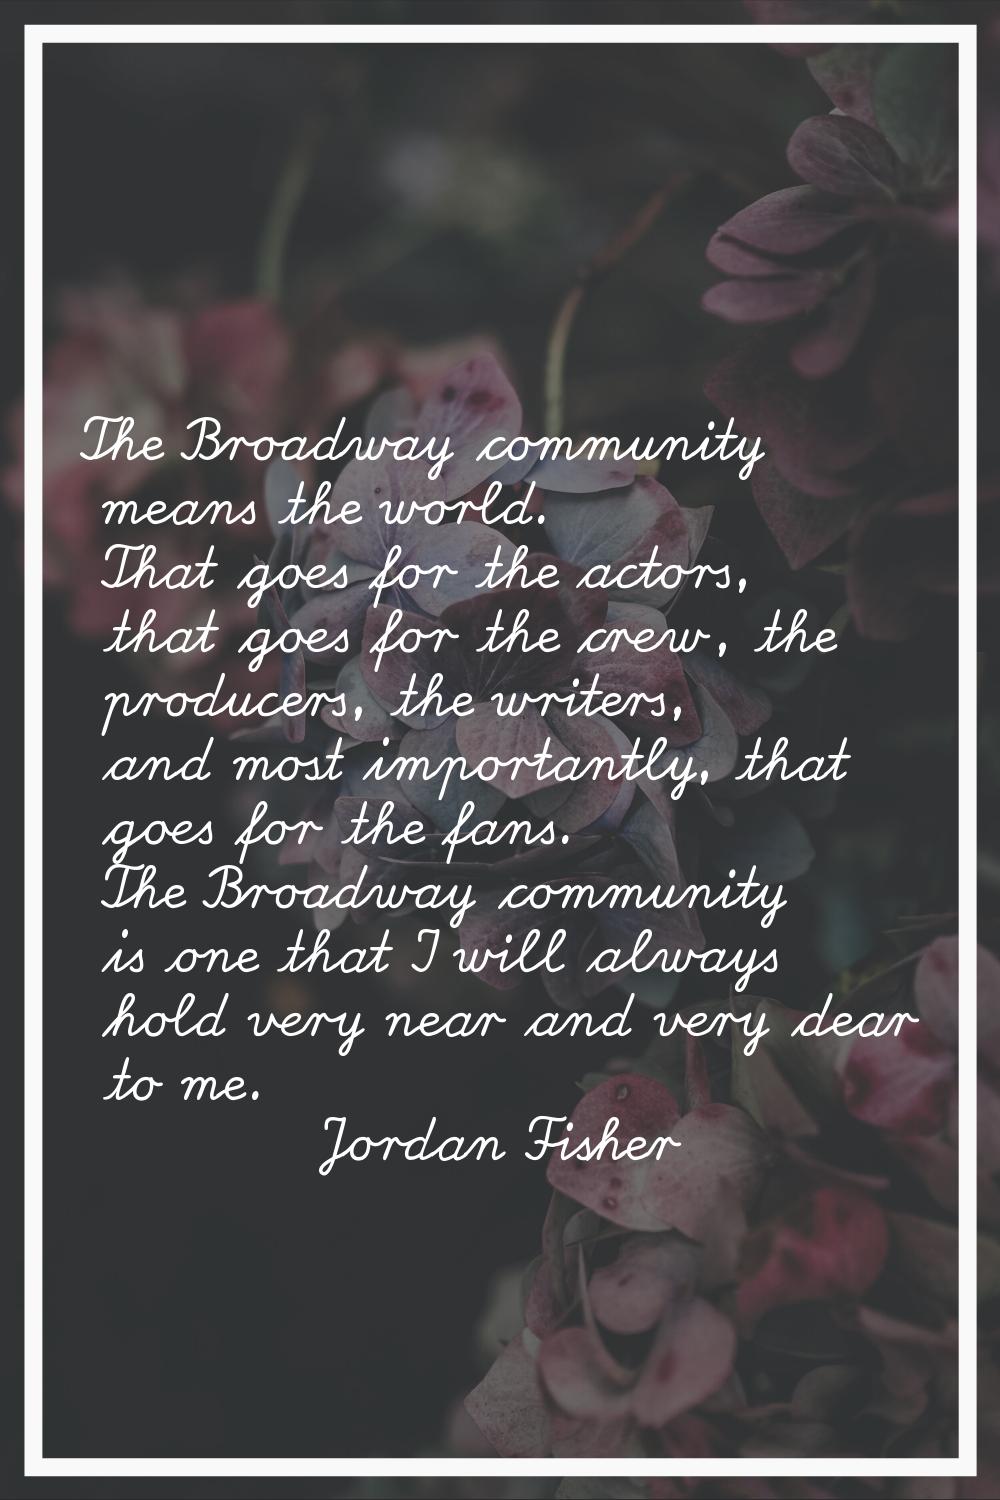 The Broadway community means the world. That goes for the actors, that goes for the crew, the produ